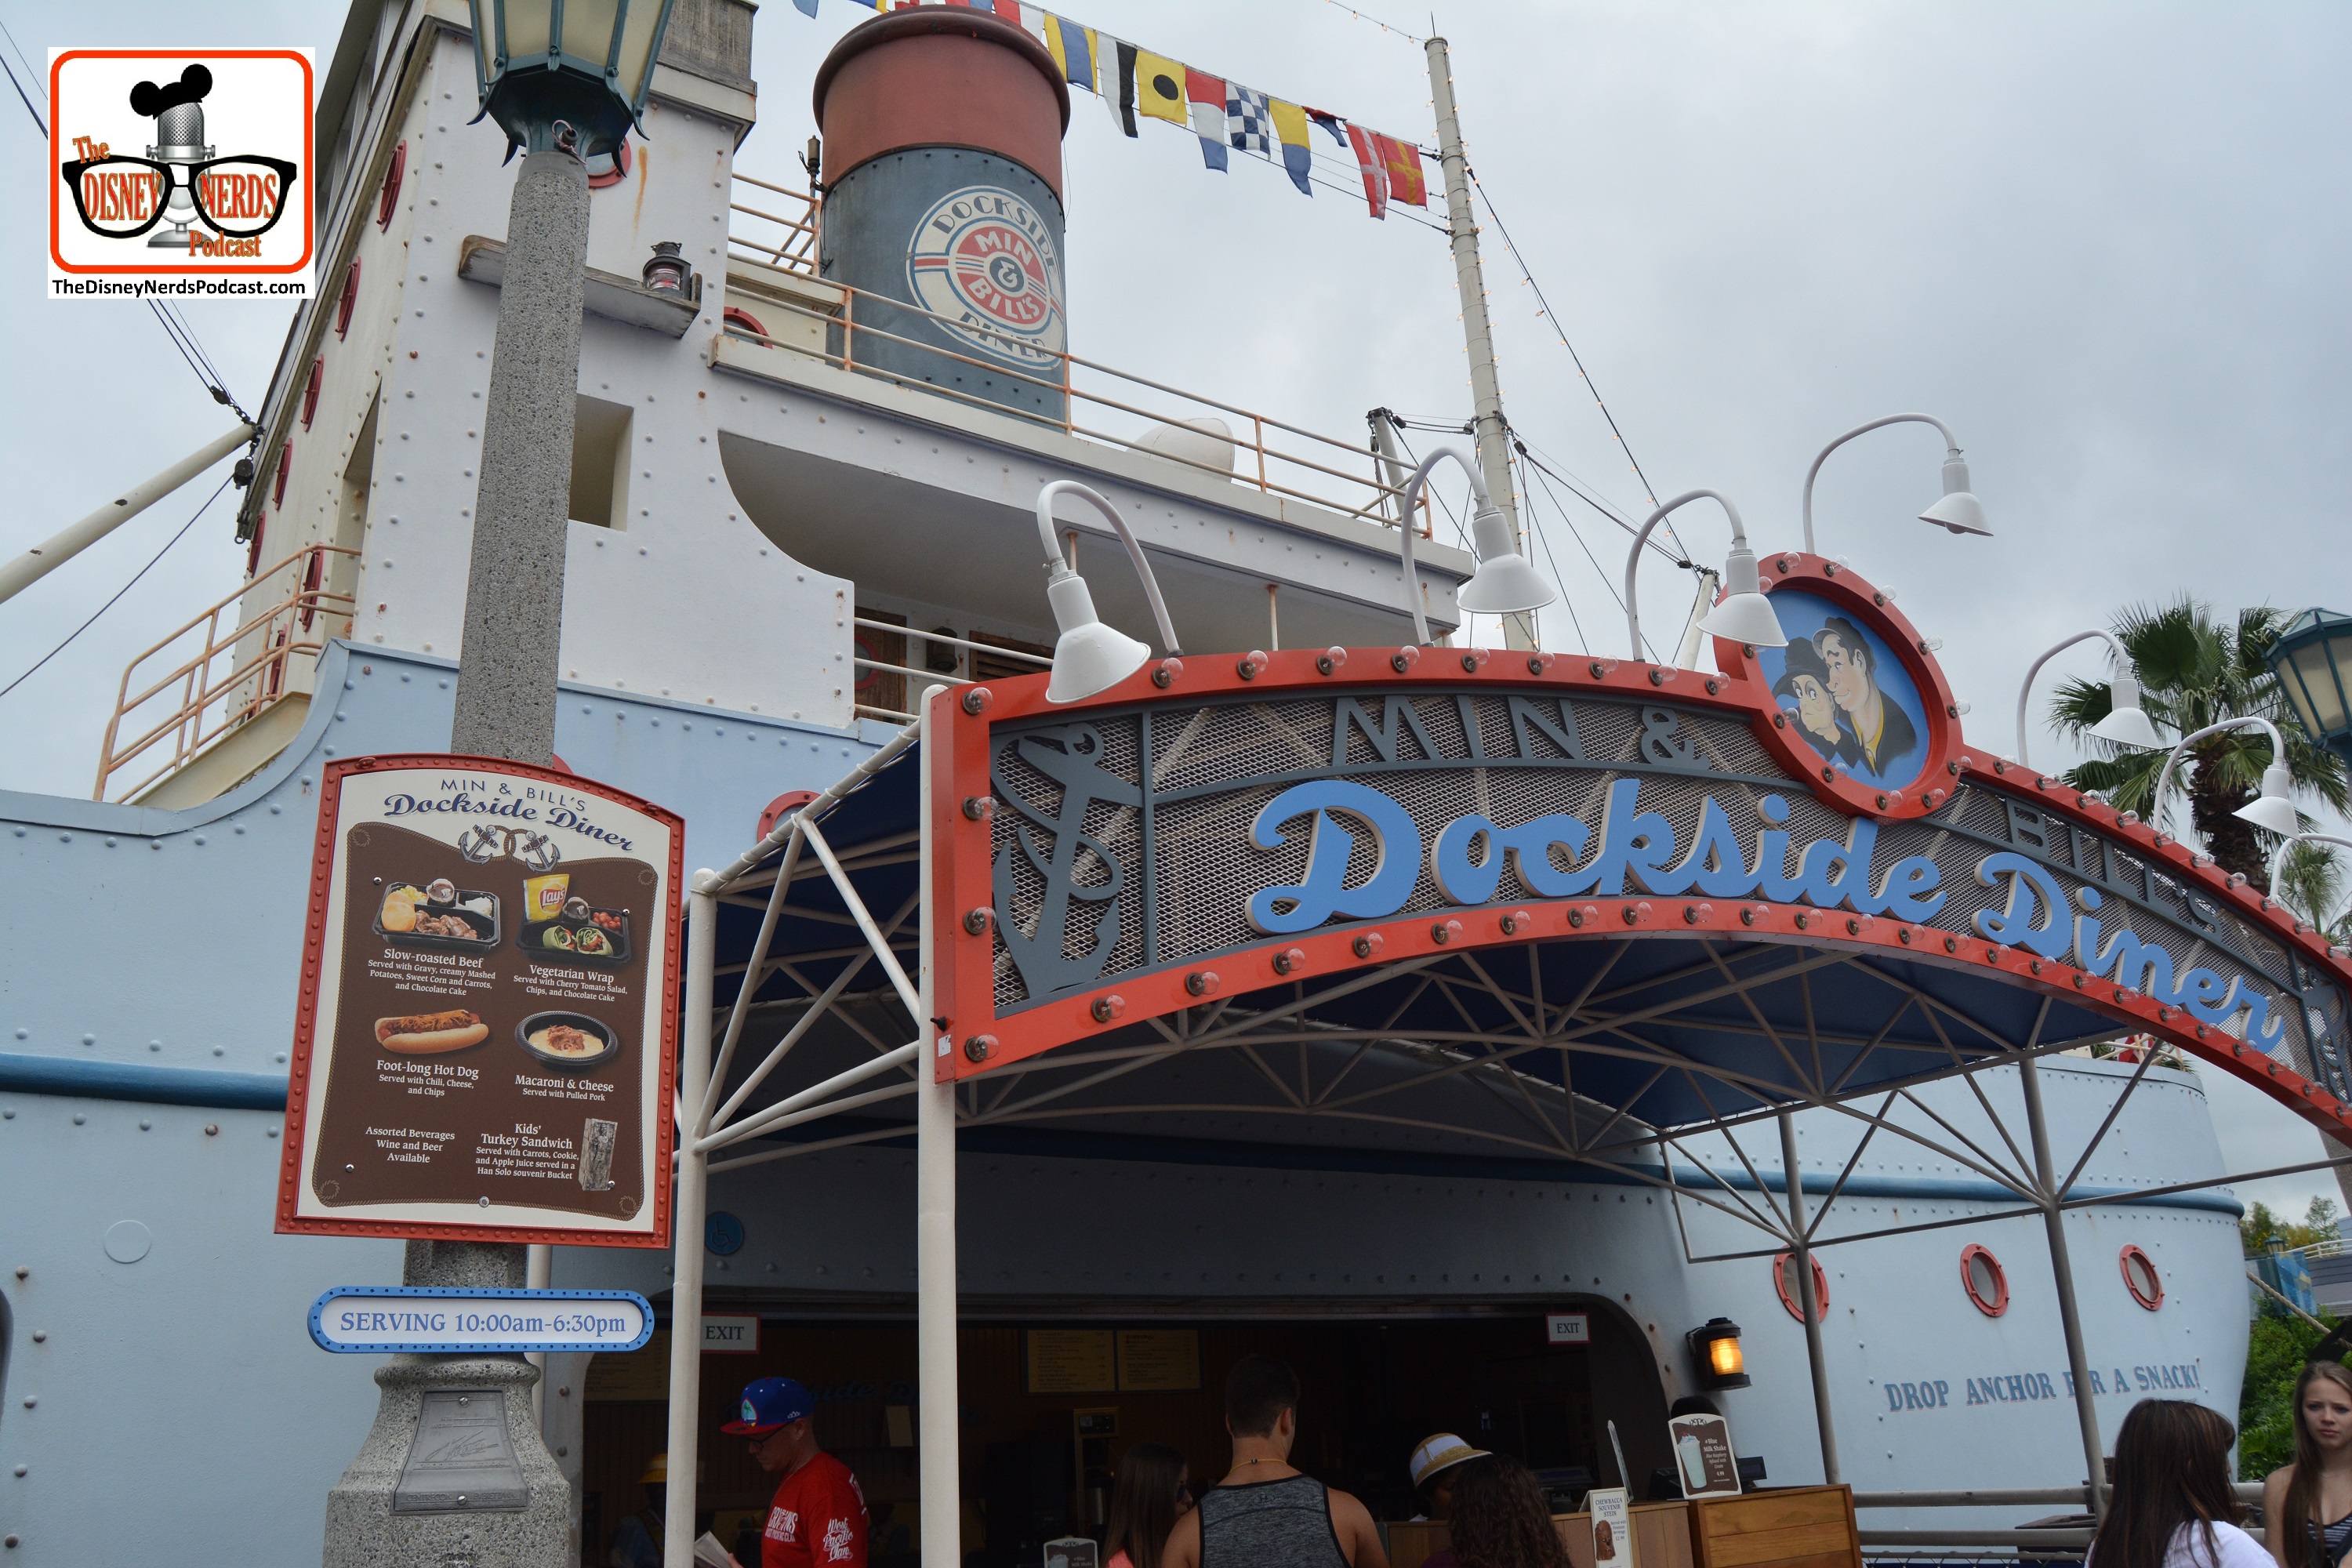 DNP April 2016 Photo Report: Hollywood Studios: Dockside Diner added some new menu options - Mac and Cheese with Pulled Pork - and of course a Kids meal in a Han Solo frozen bucket.